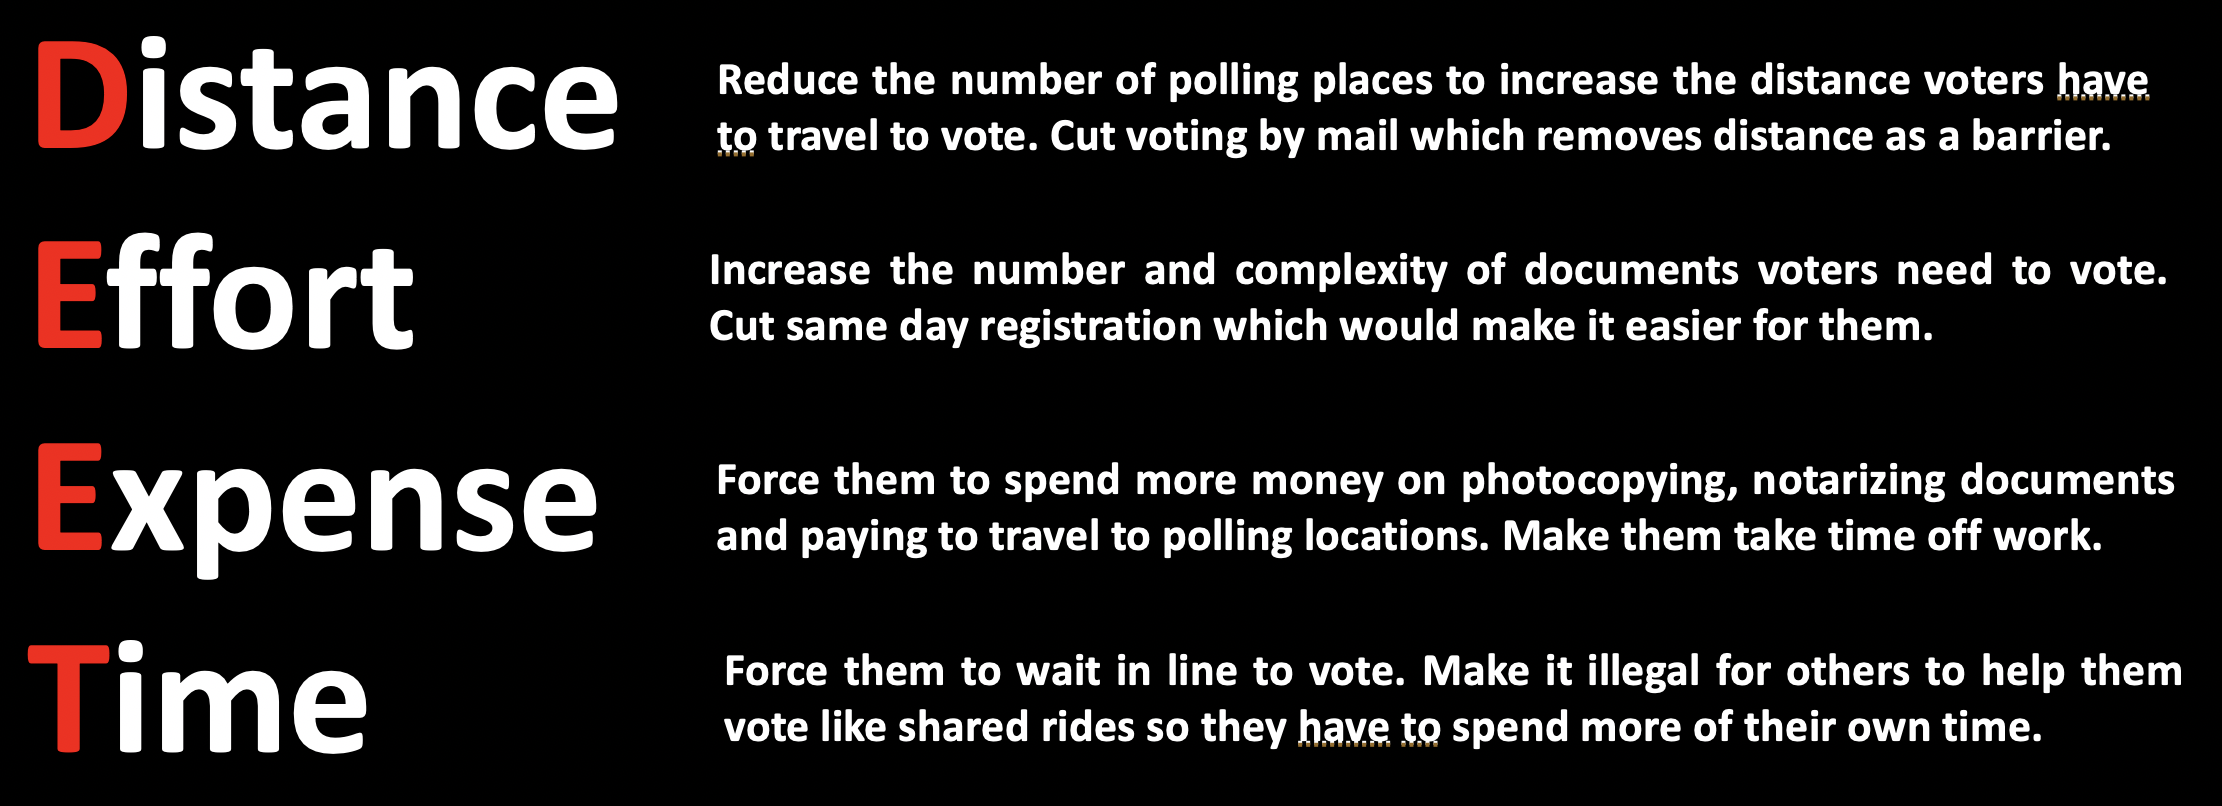 New voter suppression measures raise the cost of voting by increasing the distance, effort, expense and time voters have to pay.